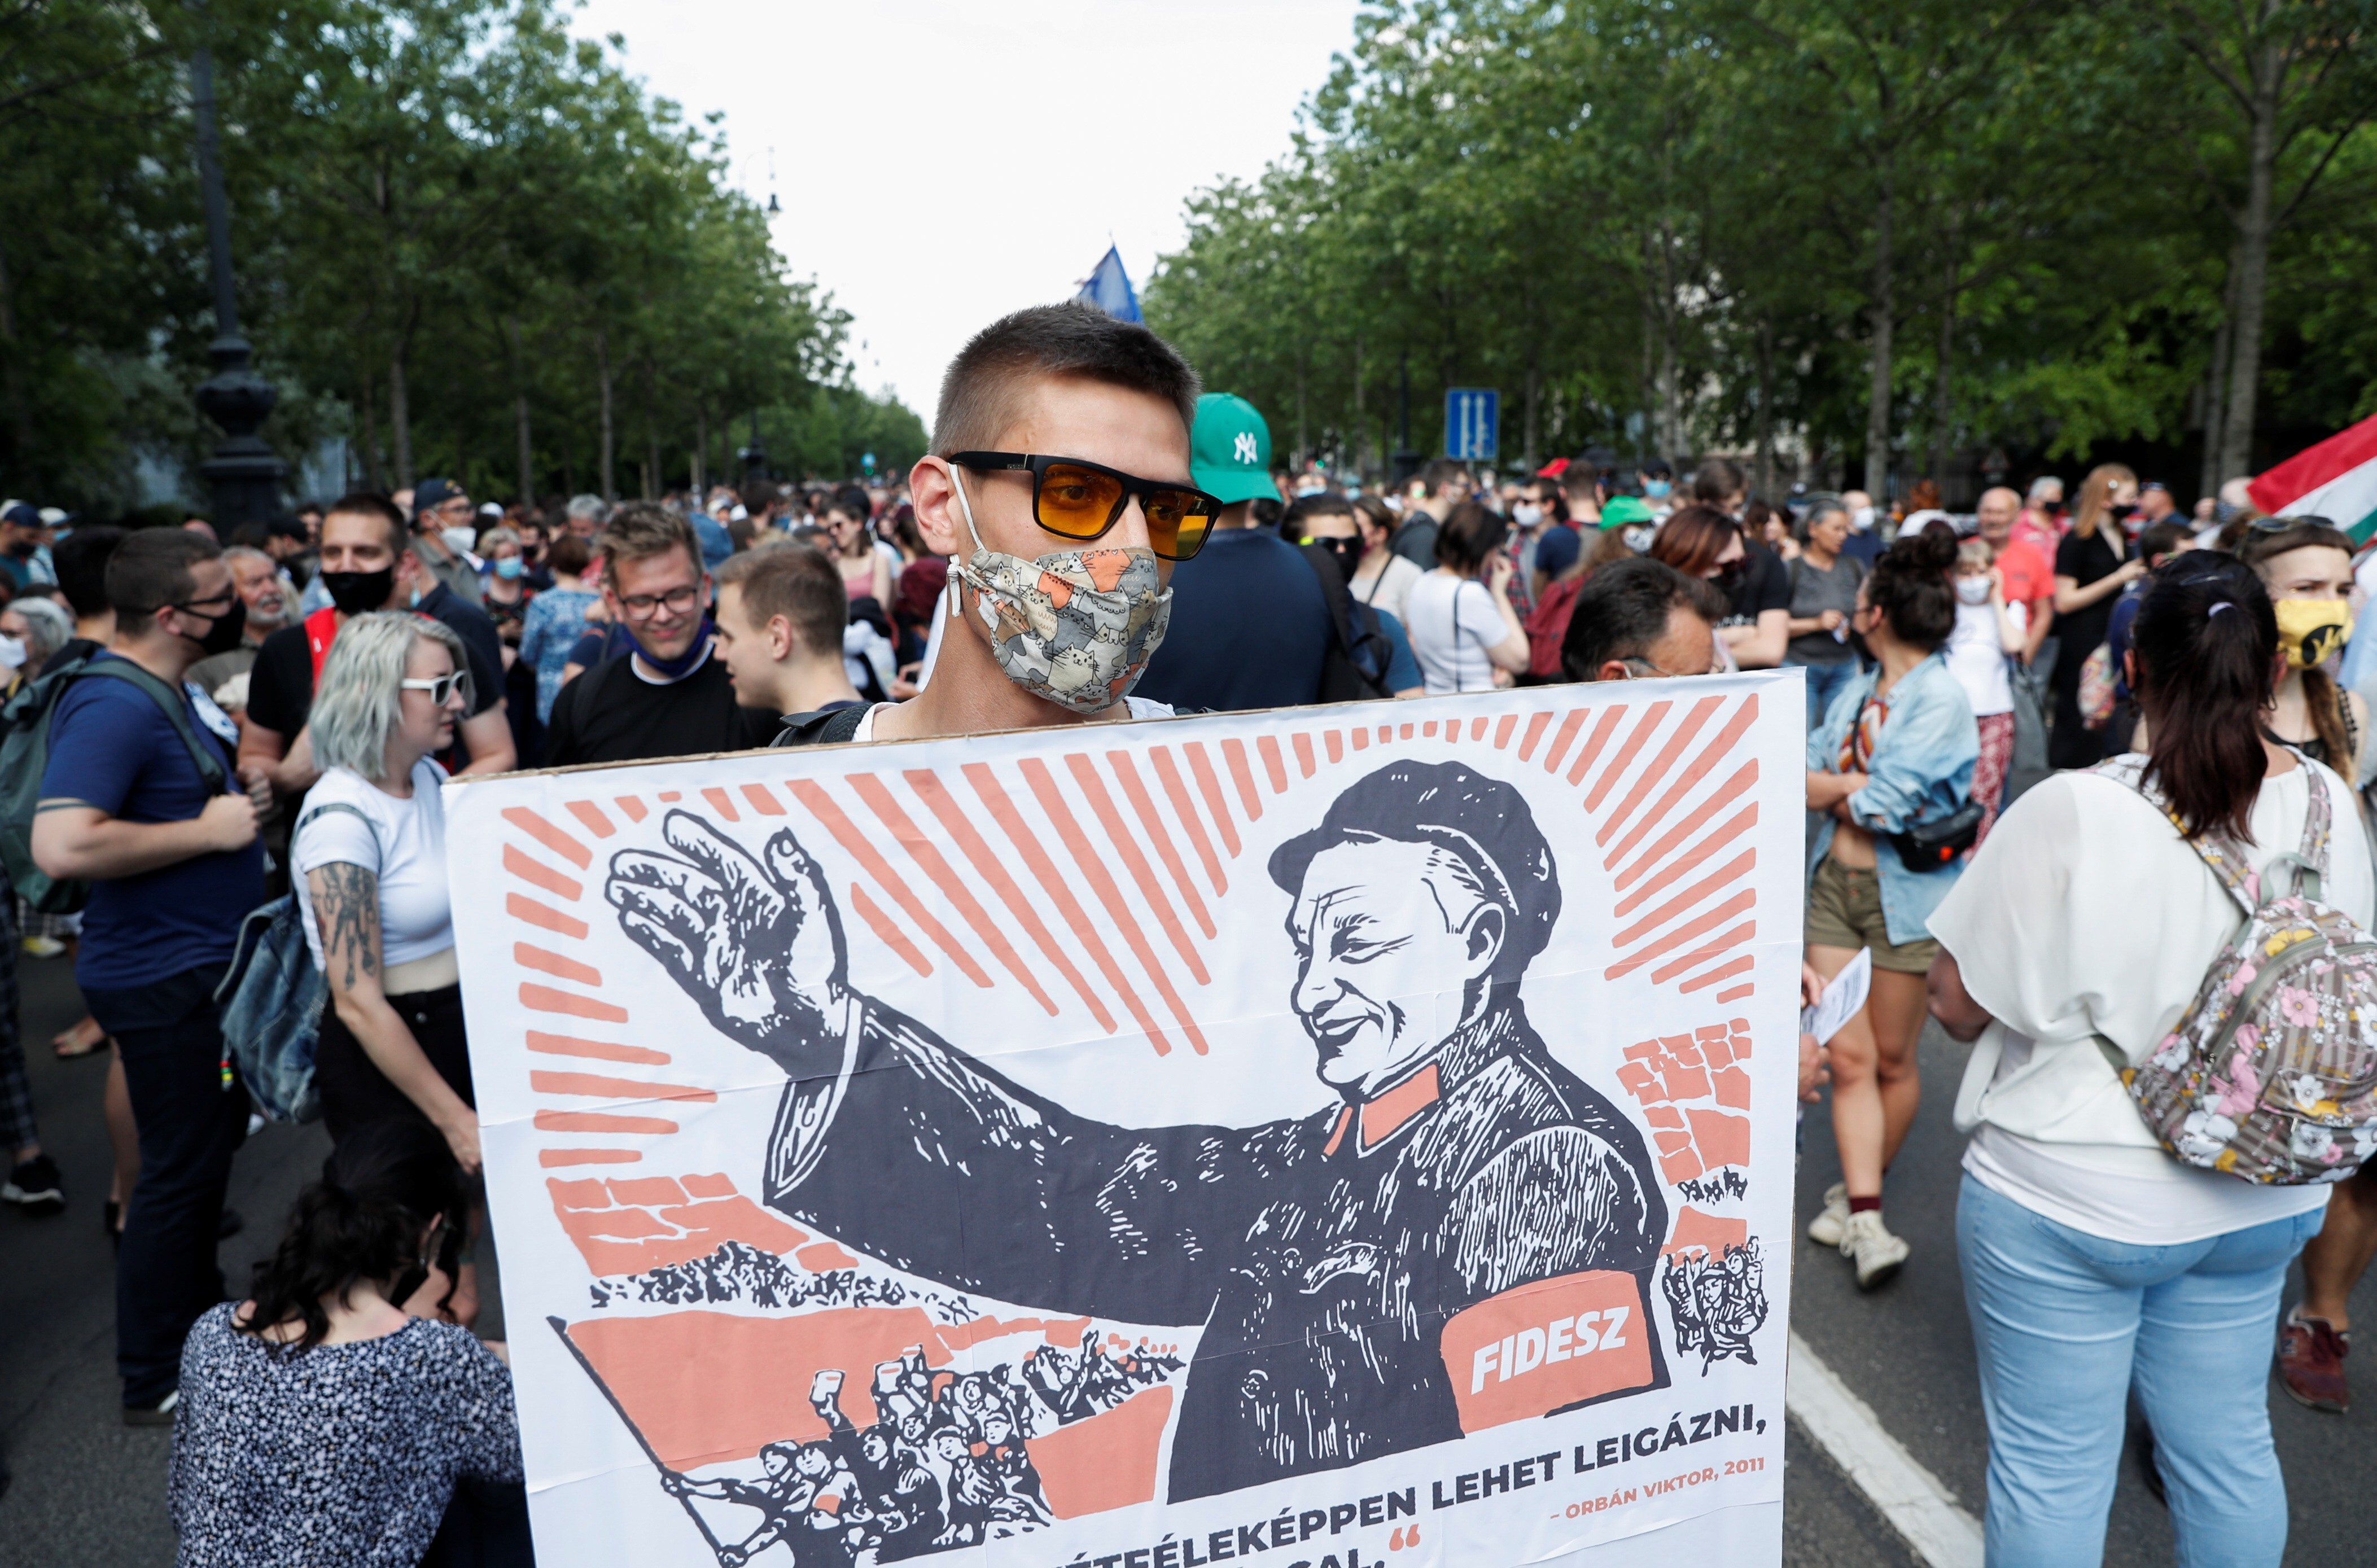 A protester holds a placard depicting Hungary’s Prime Minister Viktor Orban as Mao Zedong during a protest on June 5 against a planned Fudan University campus in Budapest. Photo: Reuters